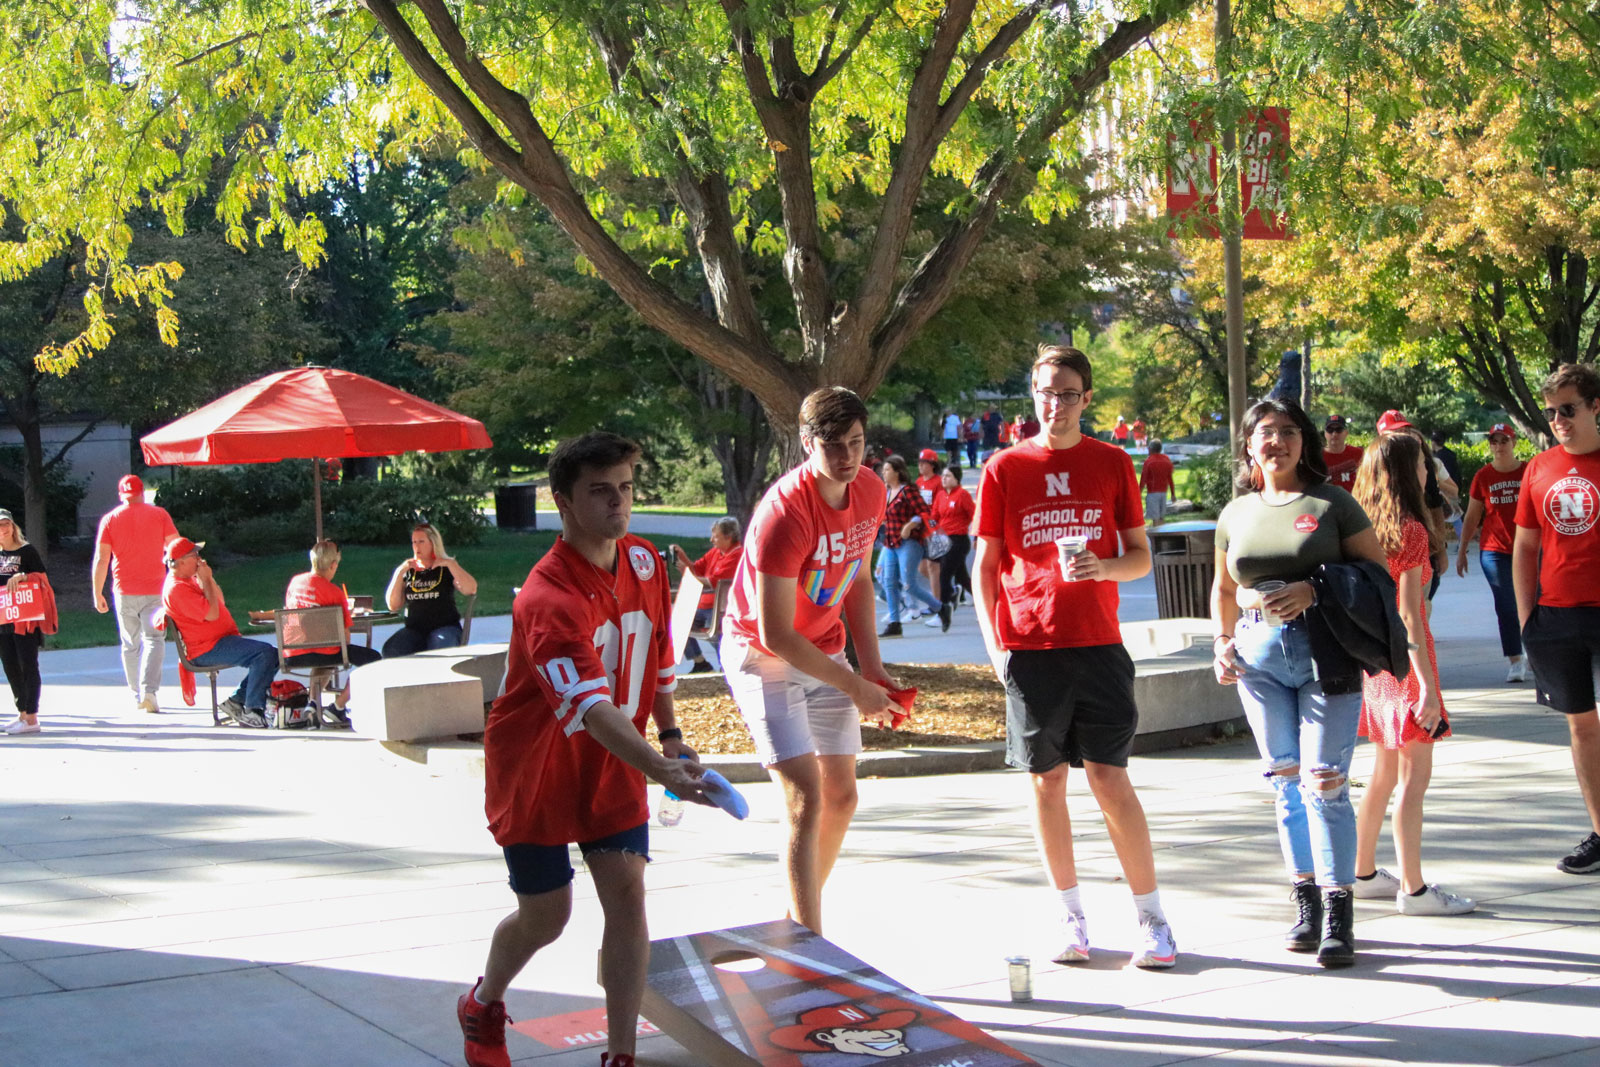 Students play cornhole at Sober Tailgate event